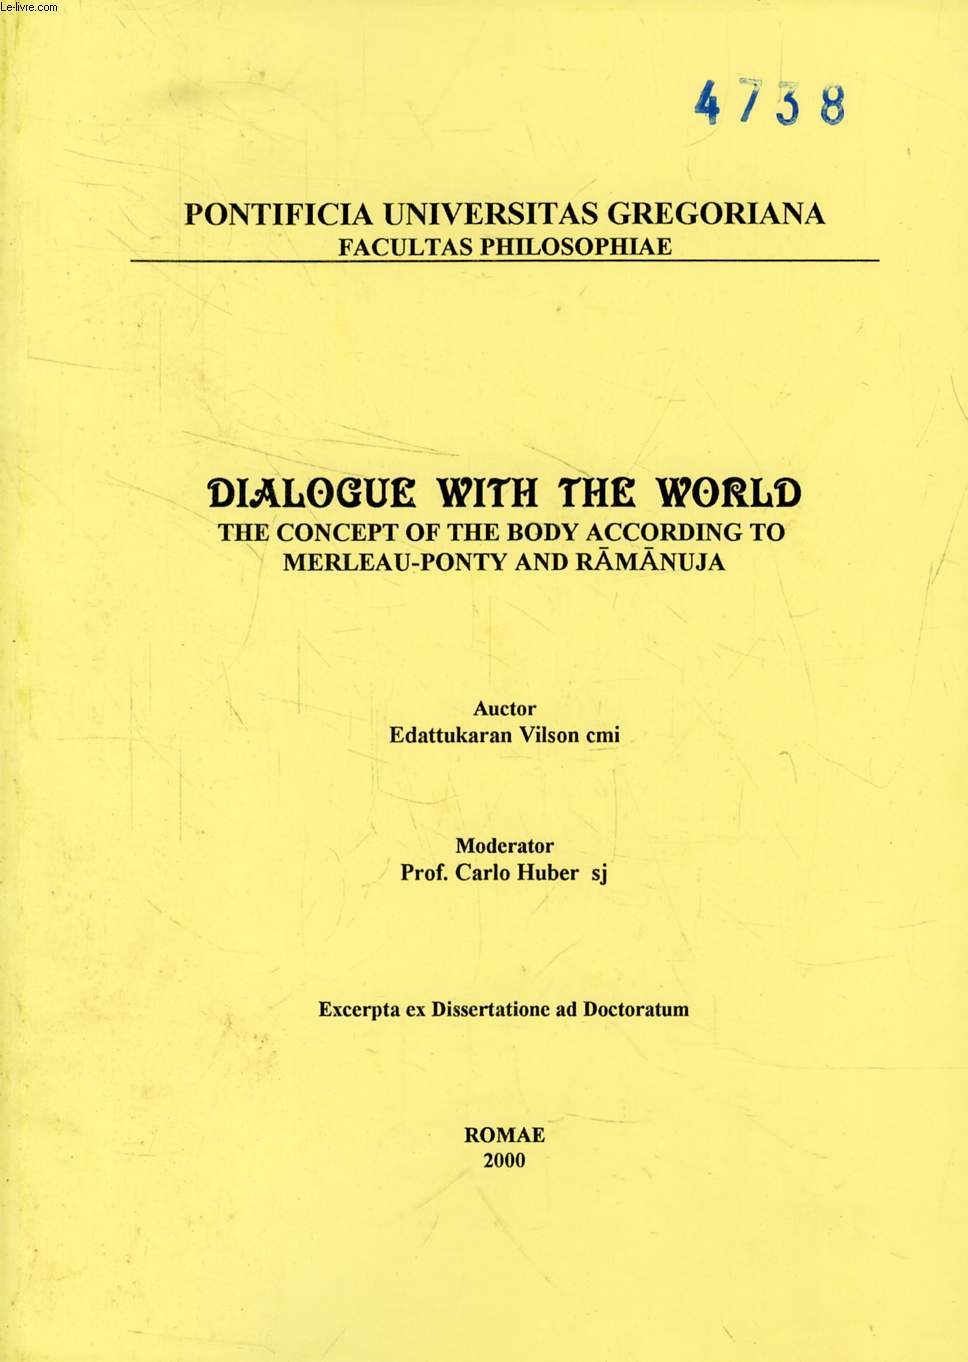 DIALOGUE WITH THE WORLD, THE CONCEPT OF THE BODY ACCORDING TO MERLEAU-PONTY AND RMNUJA (EXCERPTA EX DISSERTATIONE)